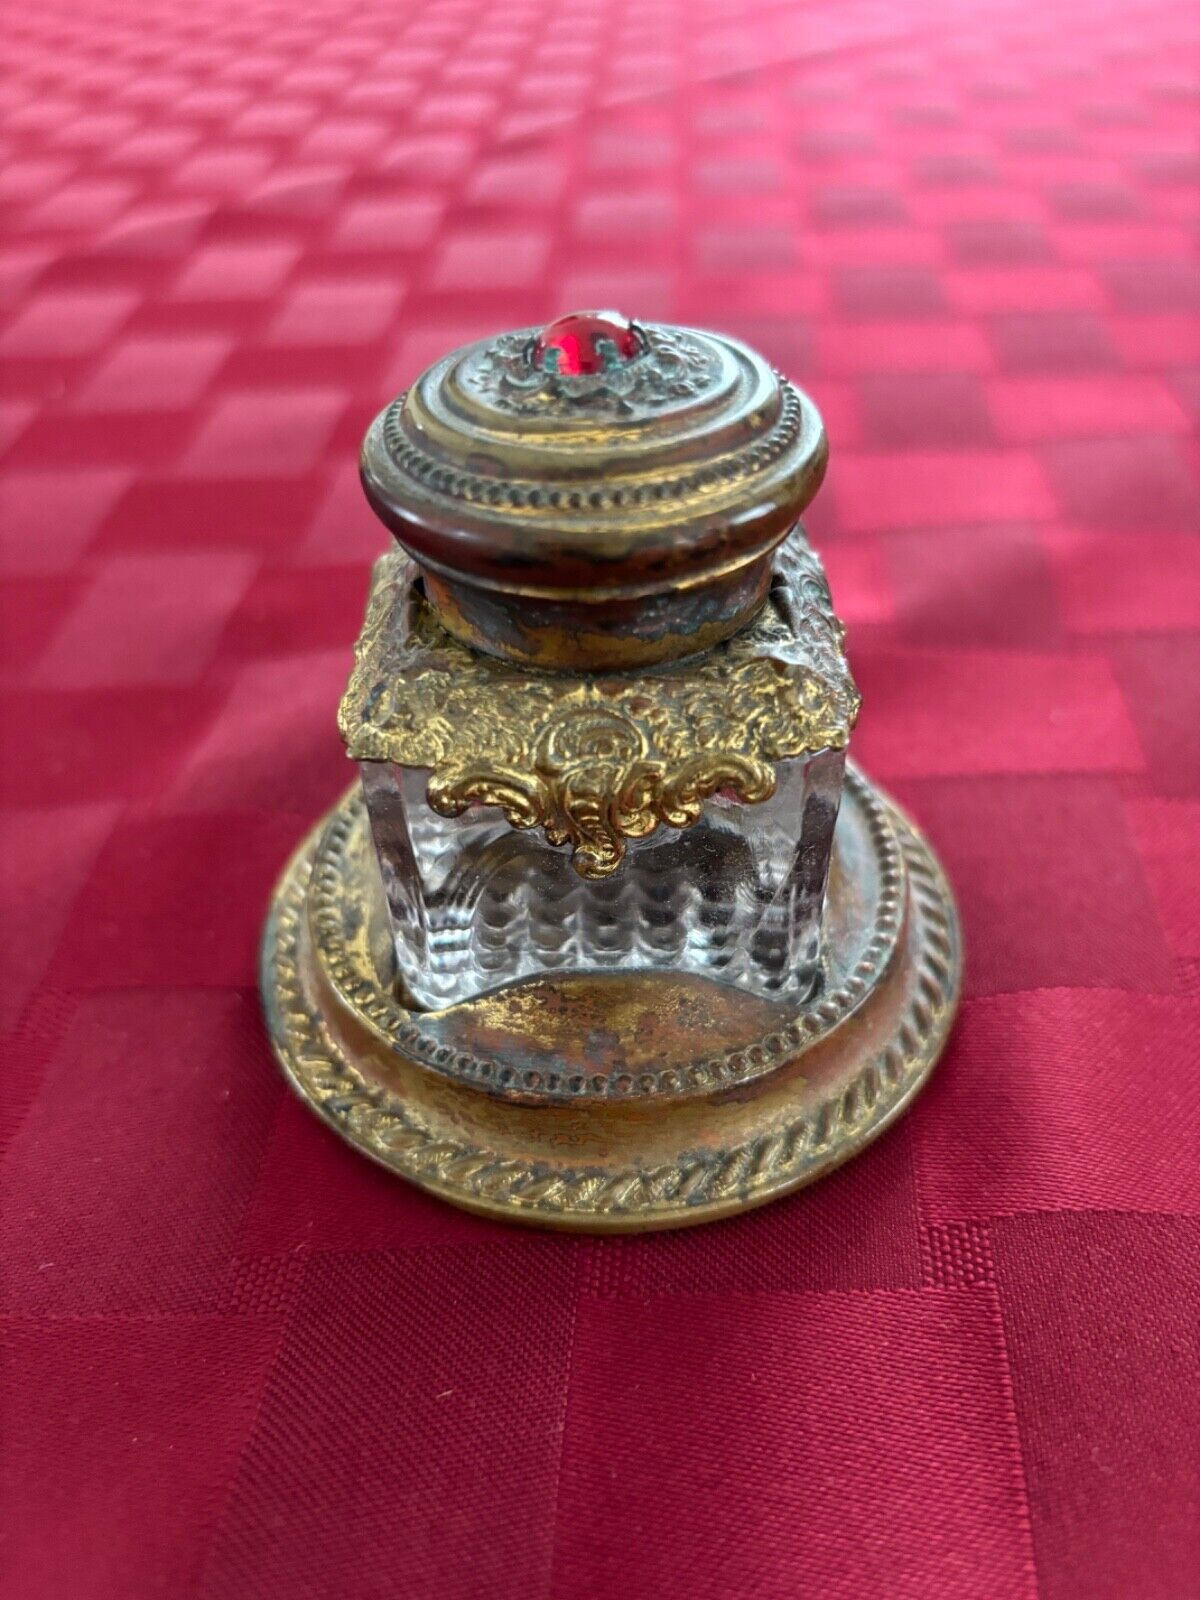 Old Inkwell. Very Decorative Finish. Glass in perfect condition. Size 3”x 2.5”